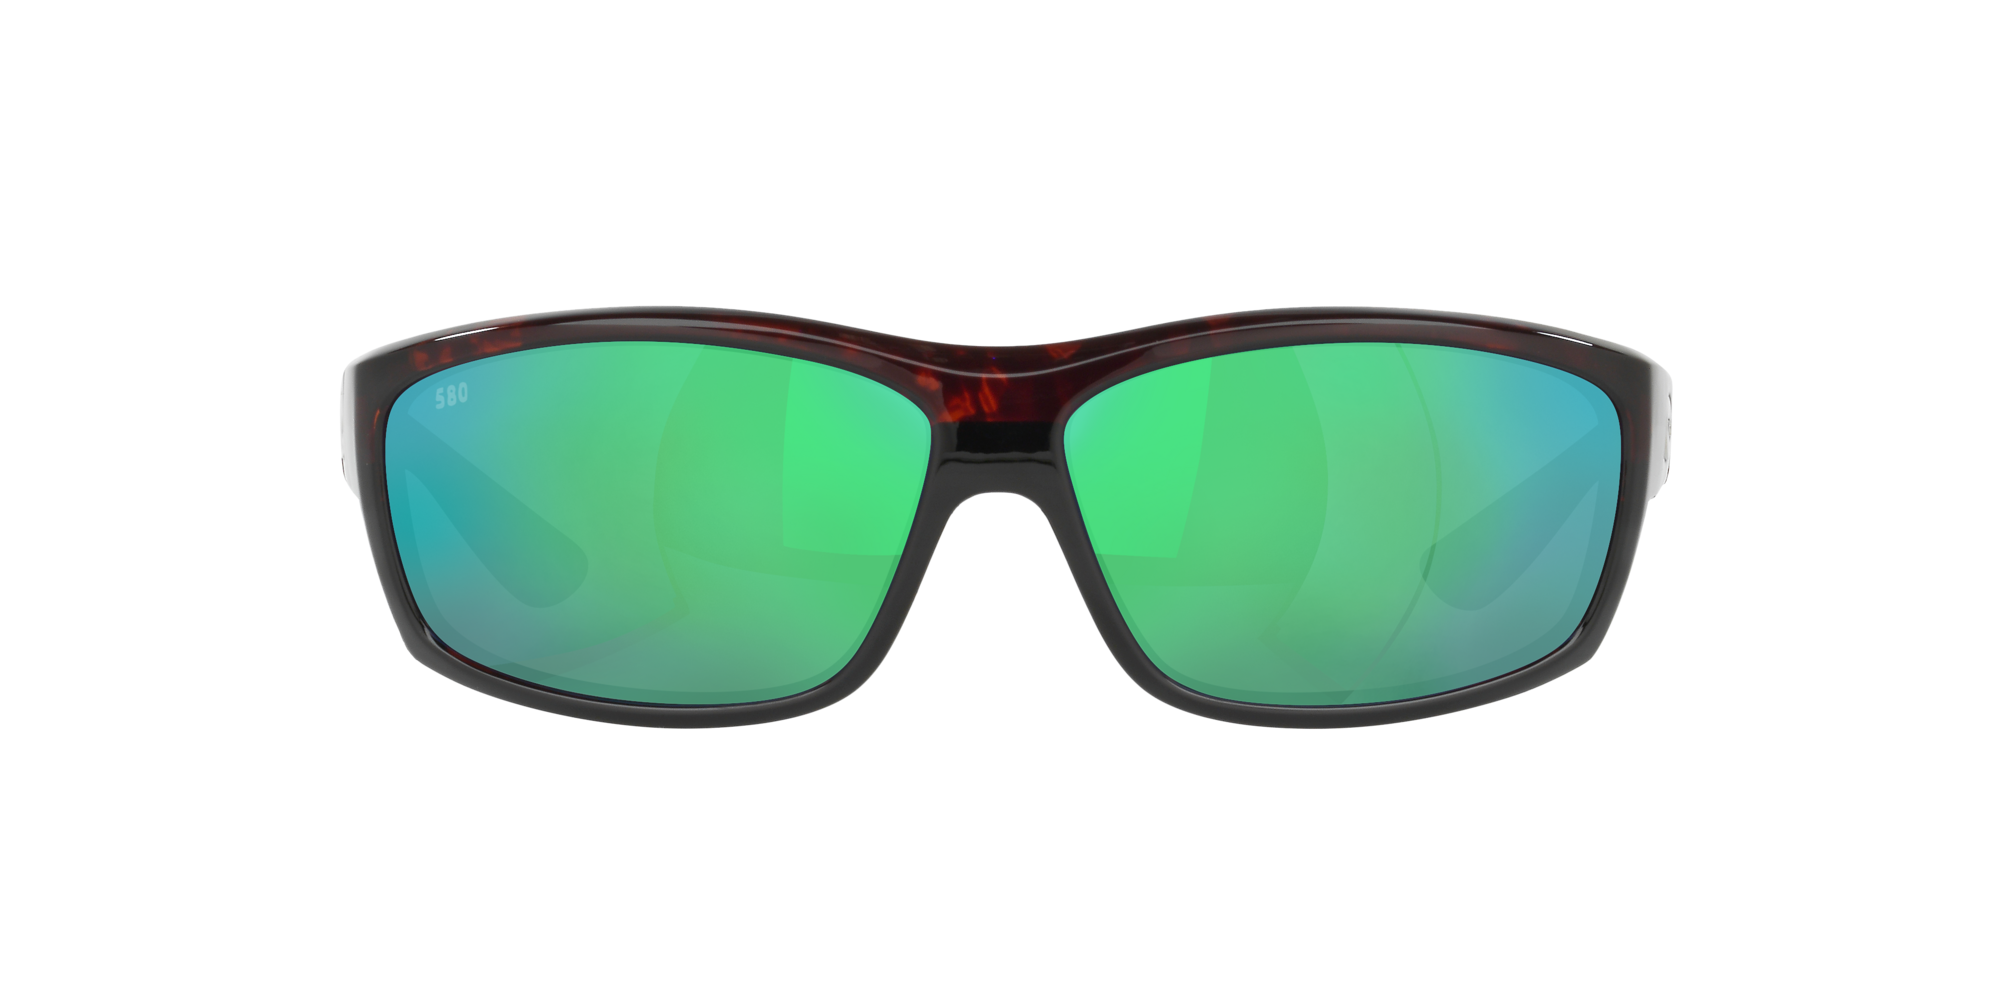 New Costa Del Mar Rooster Polarized Sunglasses 400G Glass Blackout/Green Fishing 